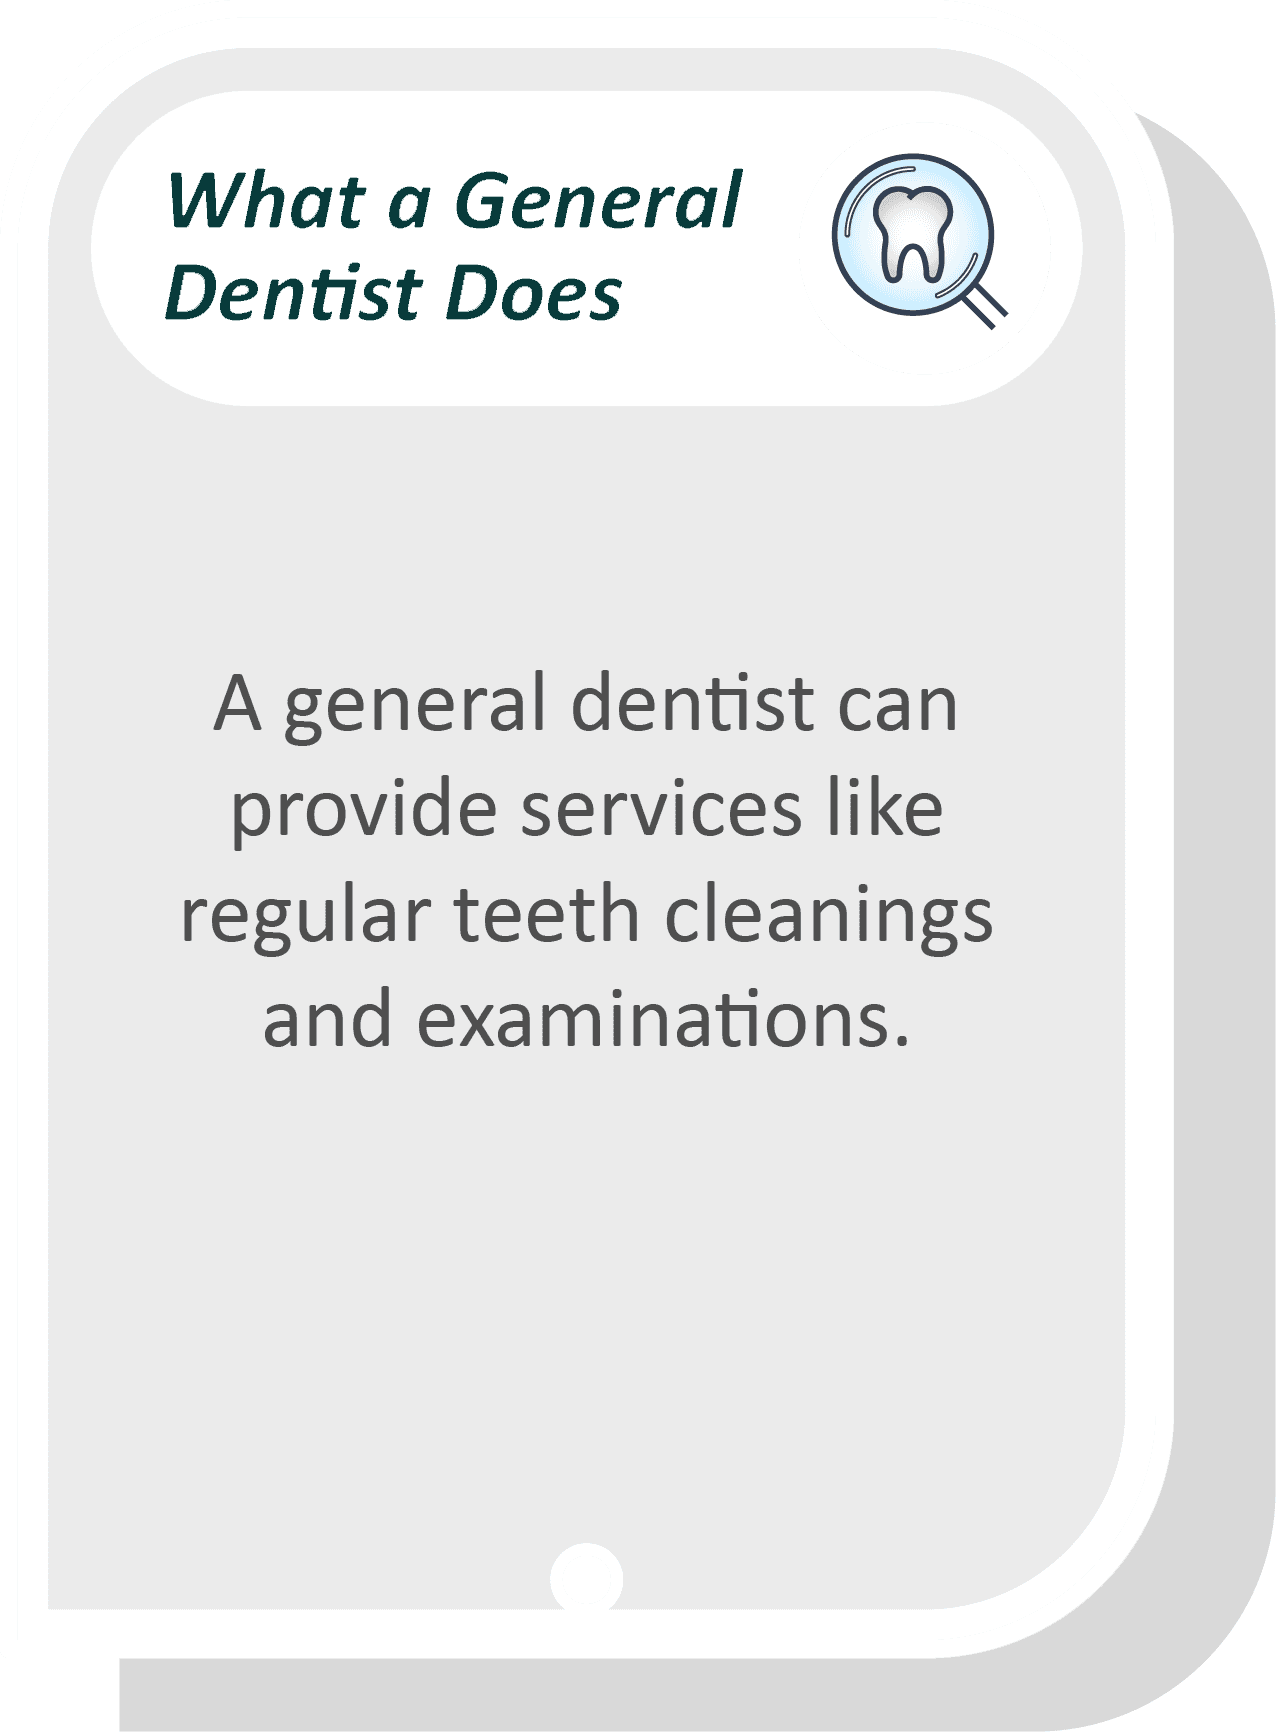 General dentist infographic: A general dentist can provide services like regular teeth cleanings and examinations.